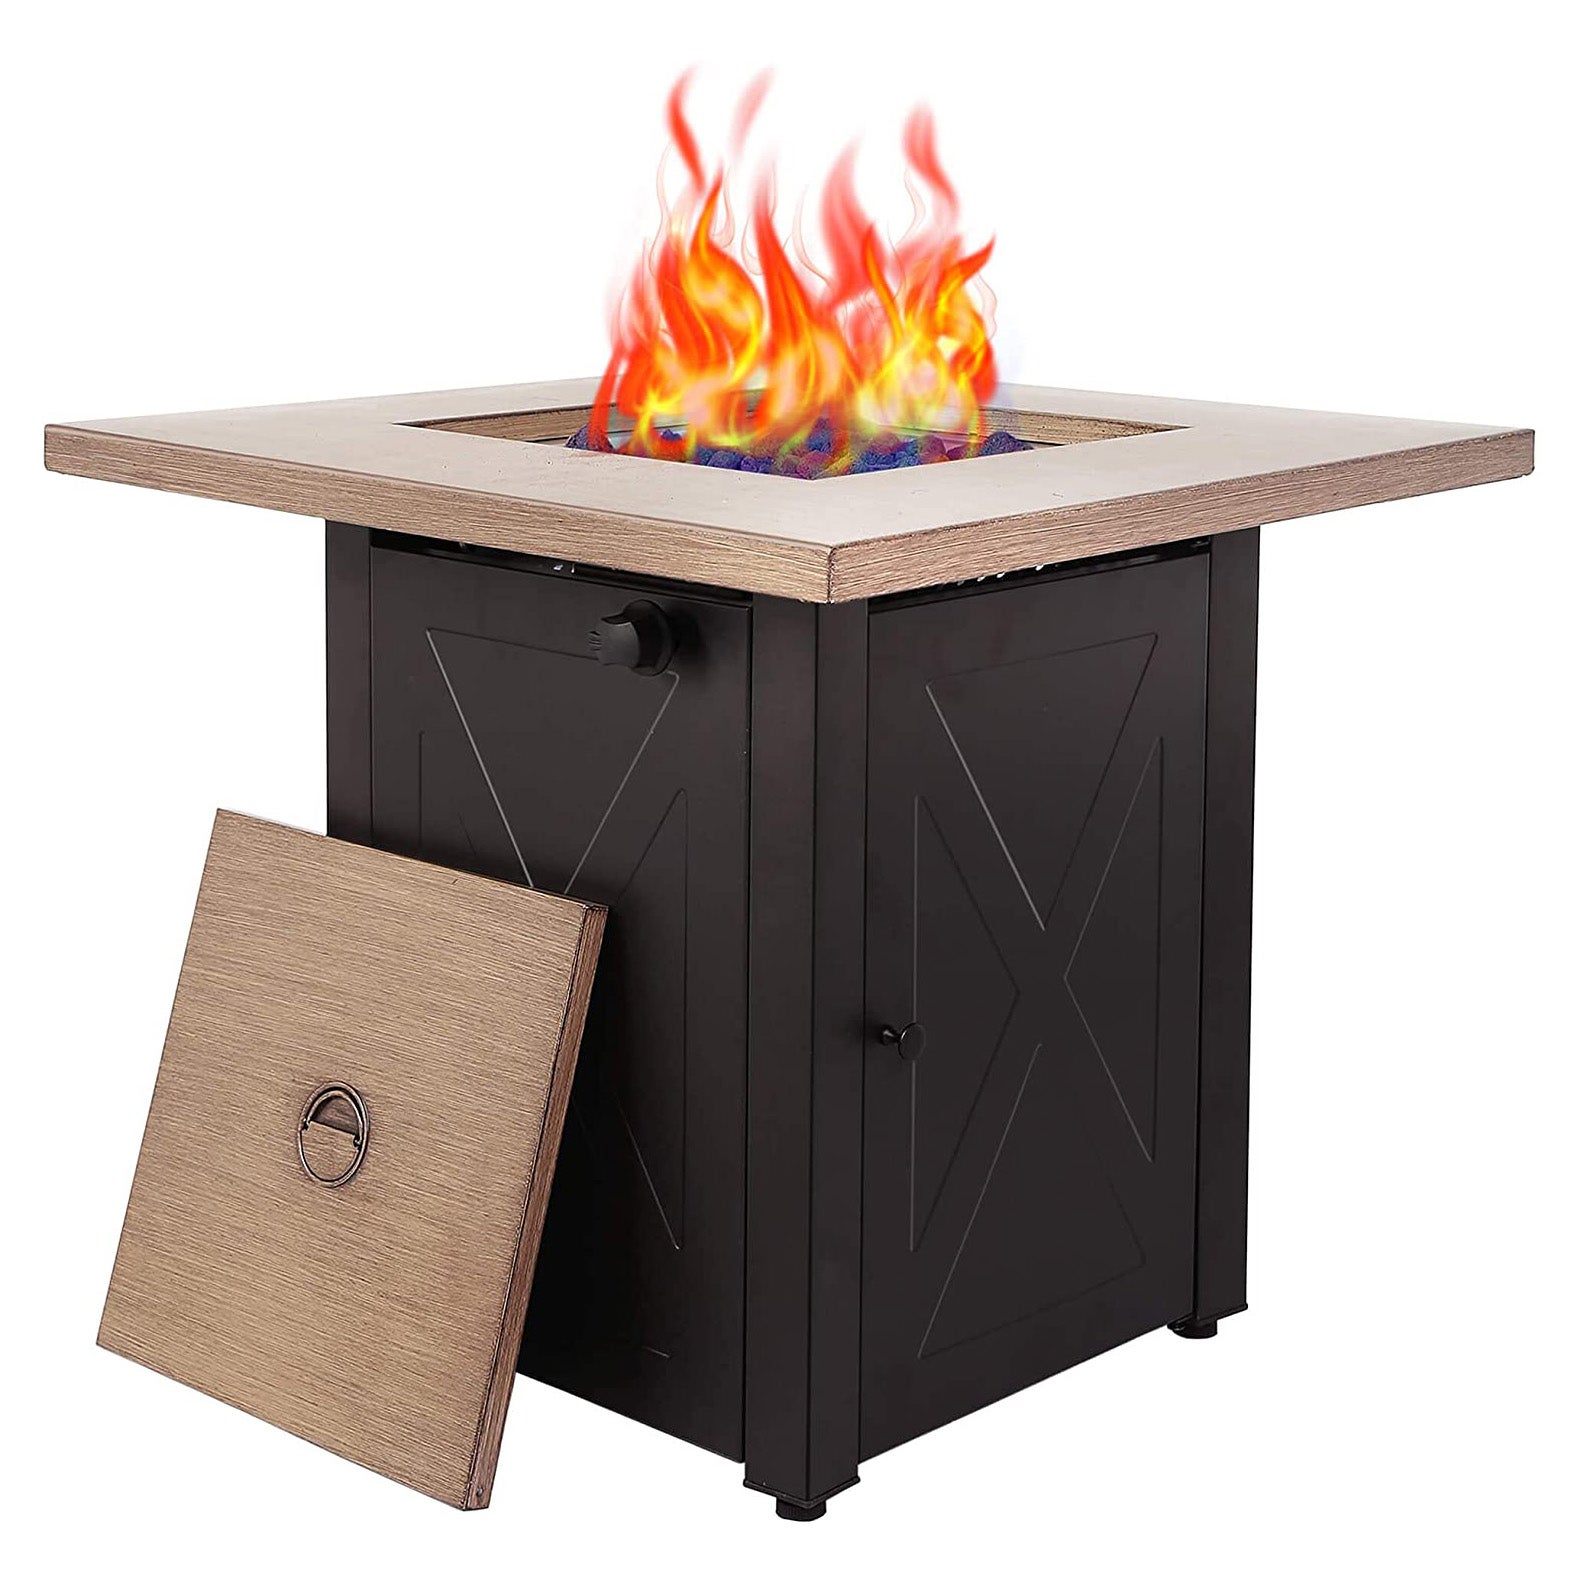 Legacy Heating Propane Fit Pit Table